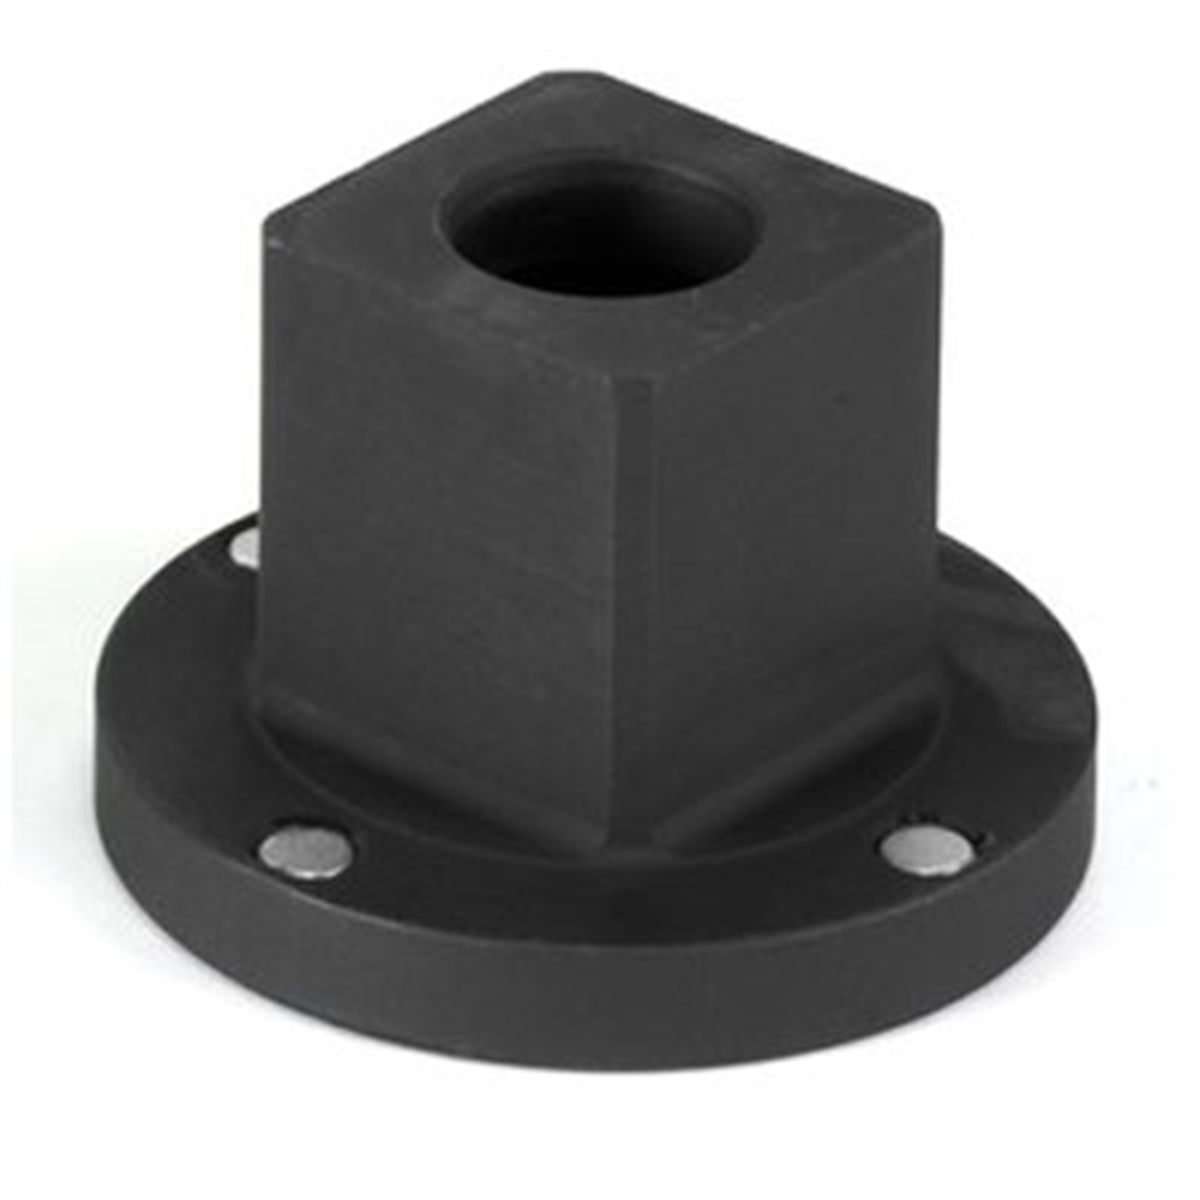 1-1/2" Female x 2-1/2" Male Reducing Sleeve Adapter Low Profile